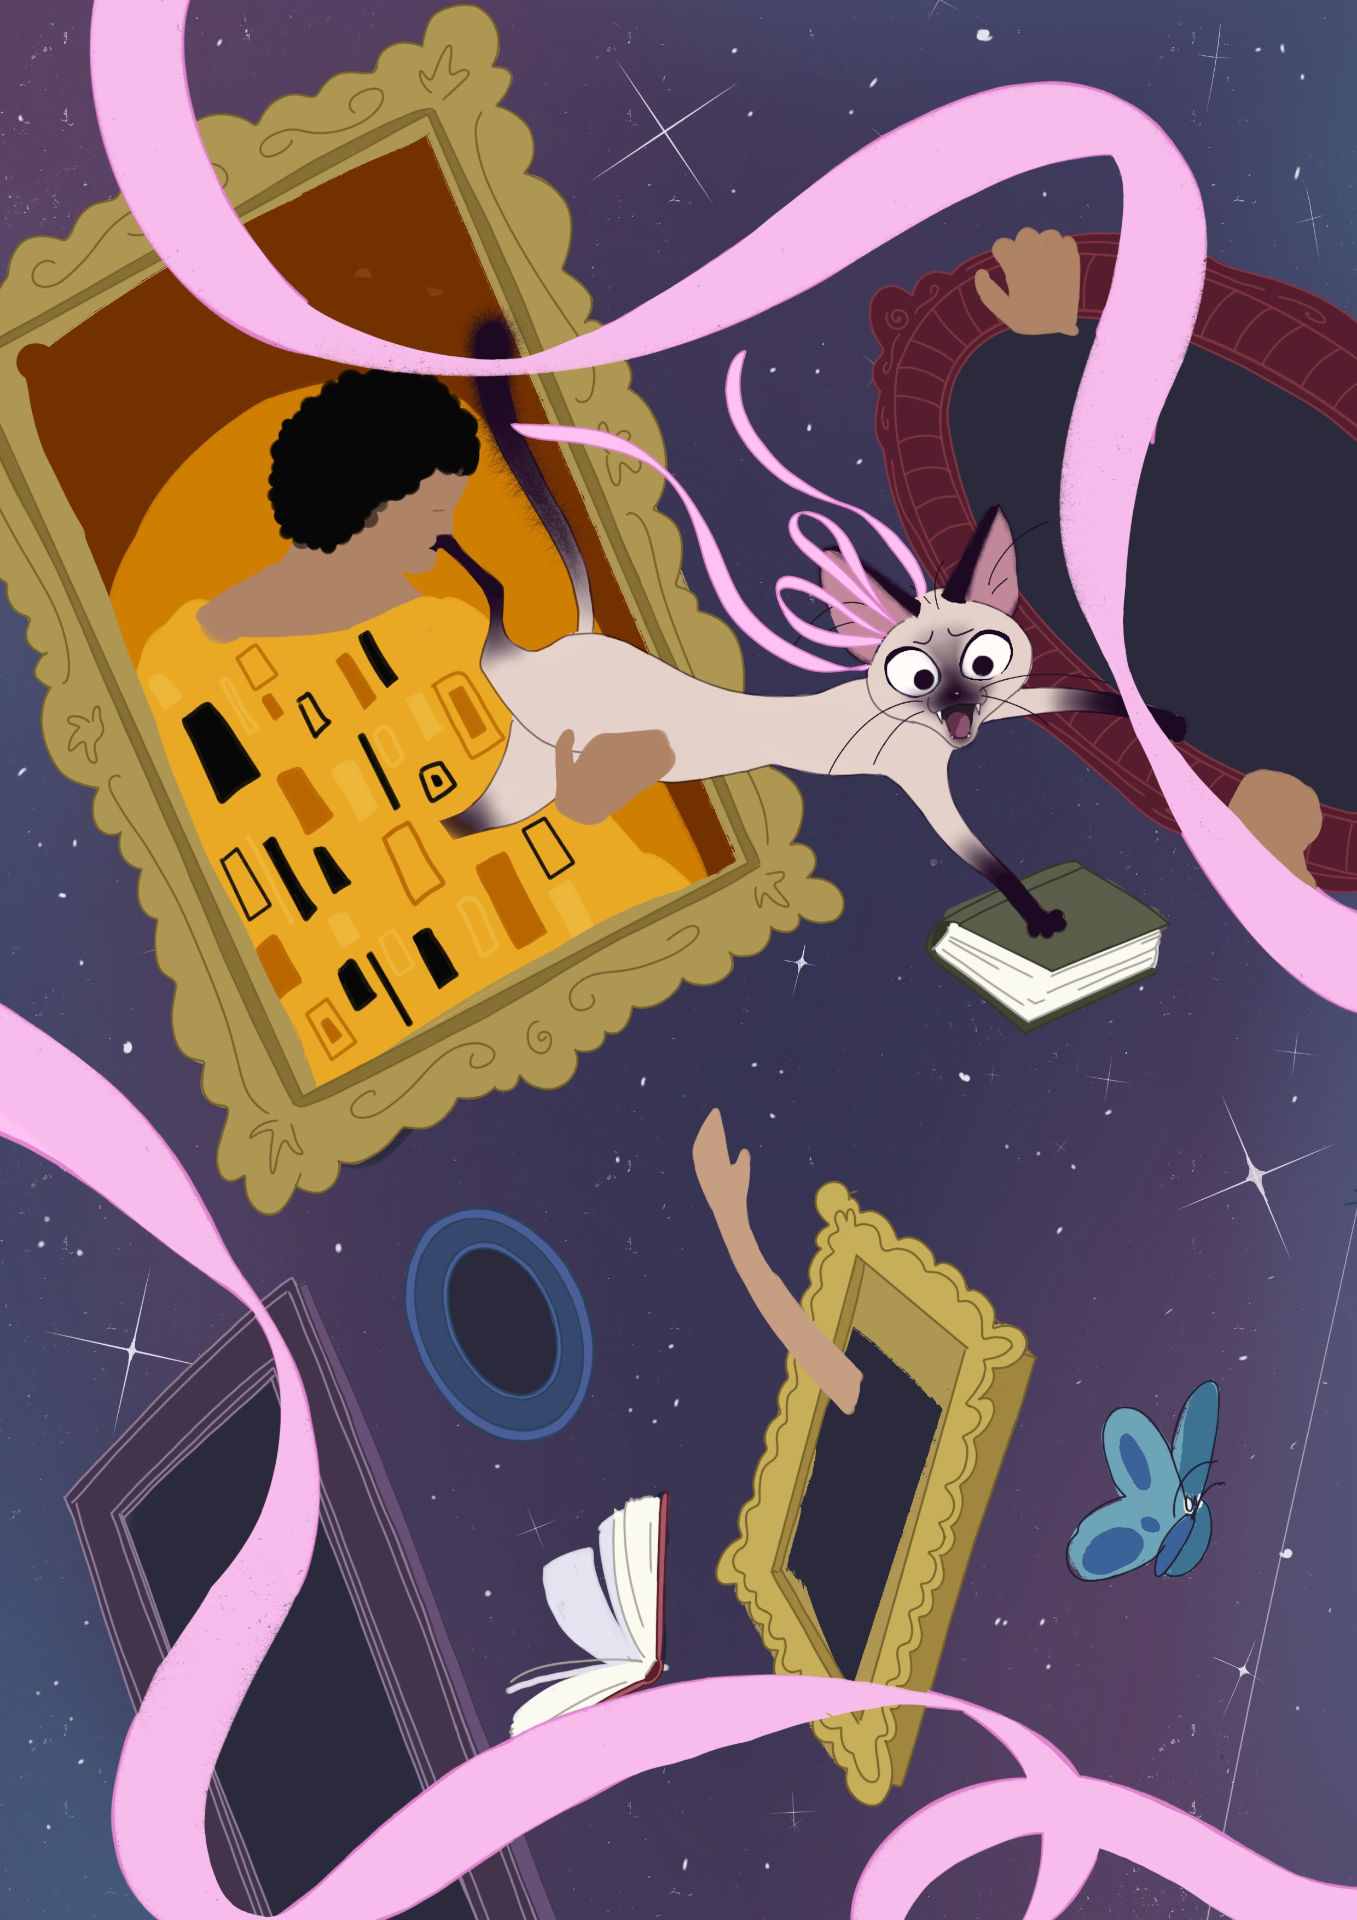 Illustration of Siamese cat falling through room with picture frames, books and a butterfly